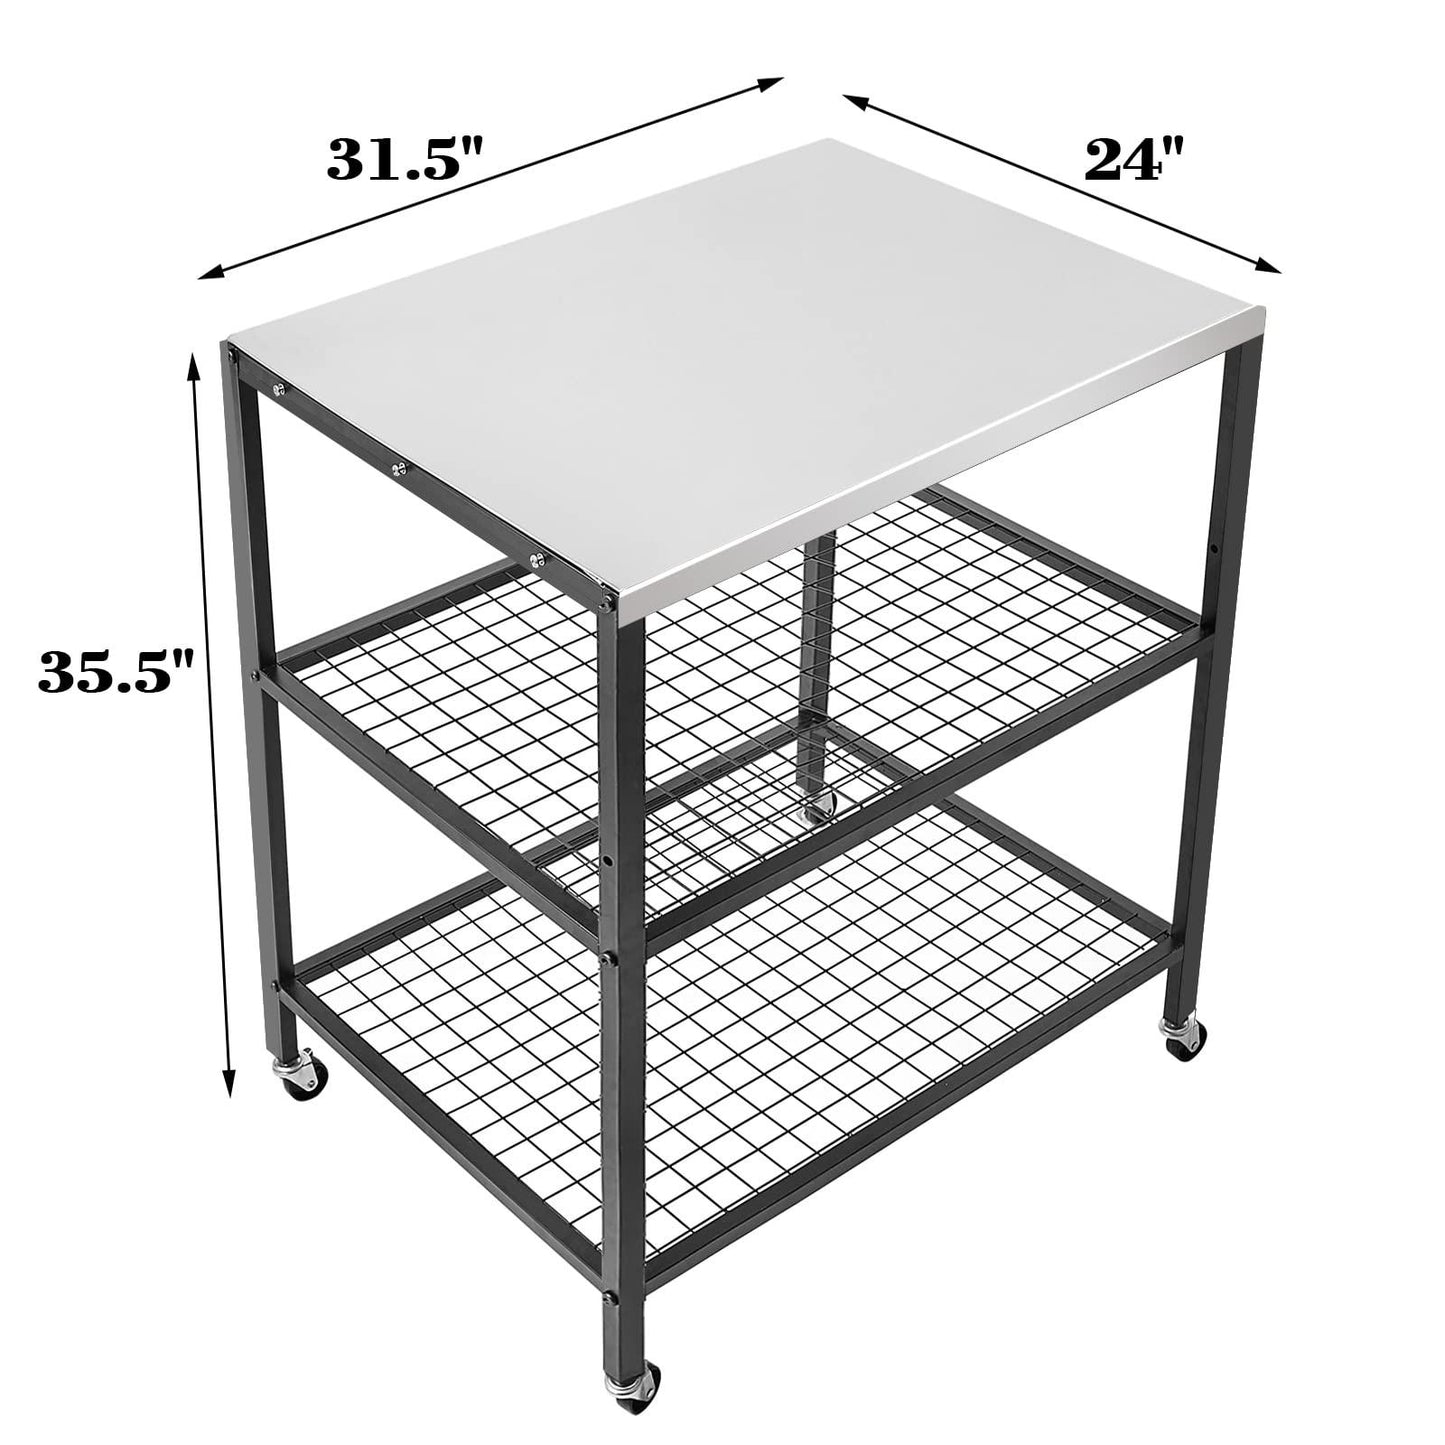 WEASHUME Stainless Steel Grill Cart Pizza Oven Stand Trolley Table with Wheels Three-Shelf Movable Food Prep and Work Cart Table Heavy Duty Grill Cart Outdoor Cart 31.5"×24"×35.5" - CookCave